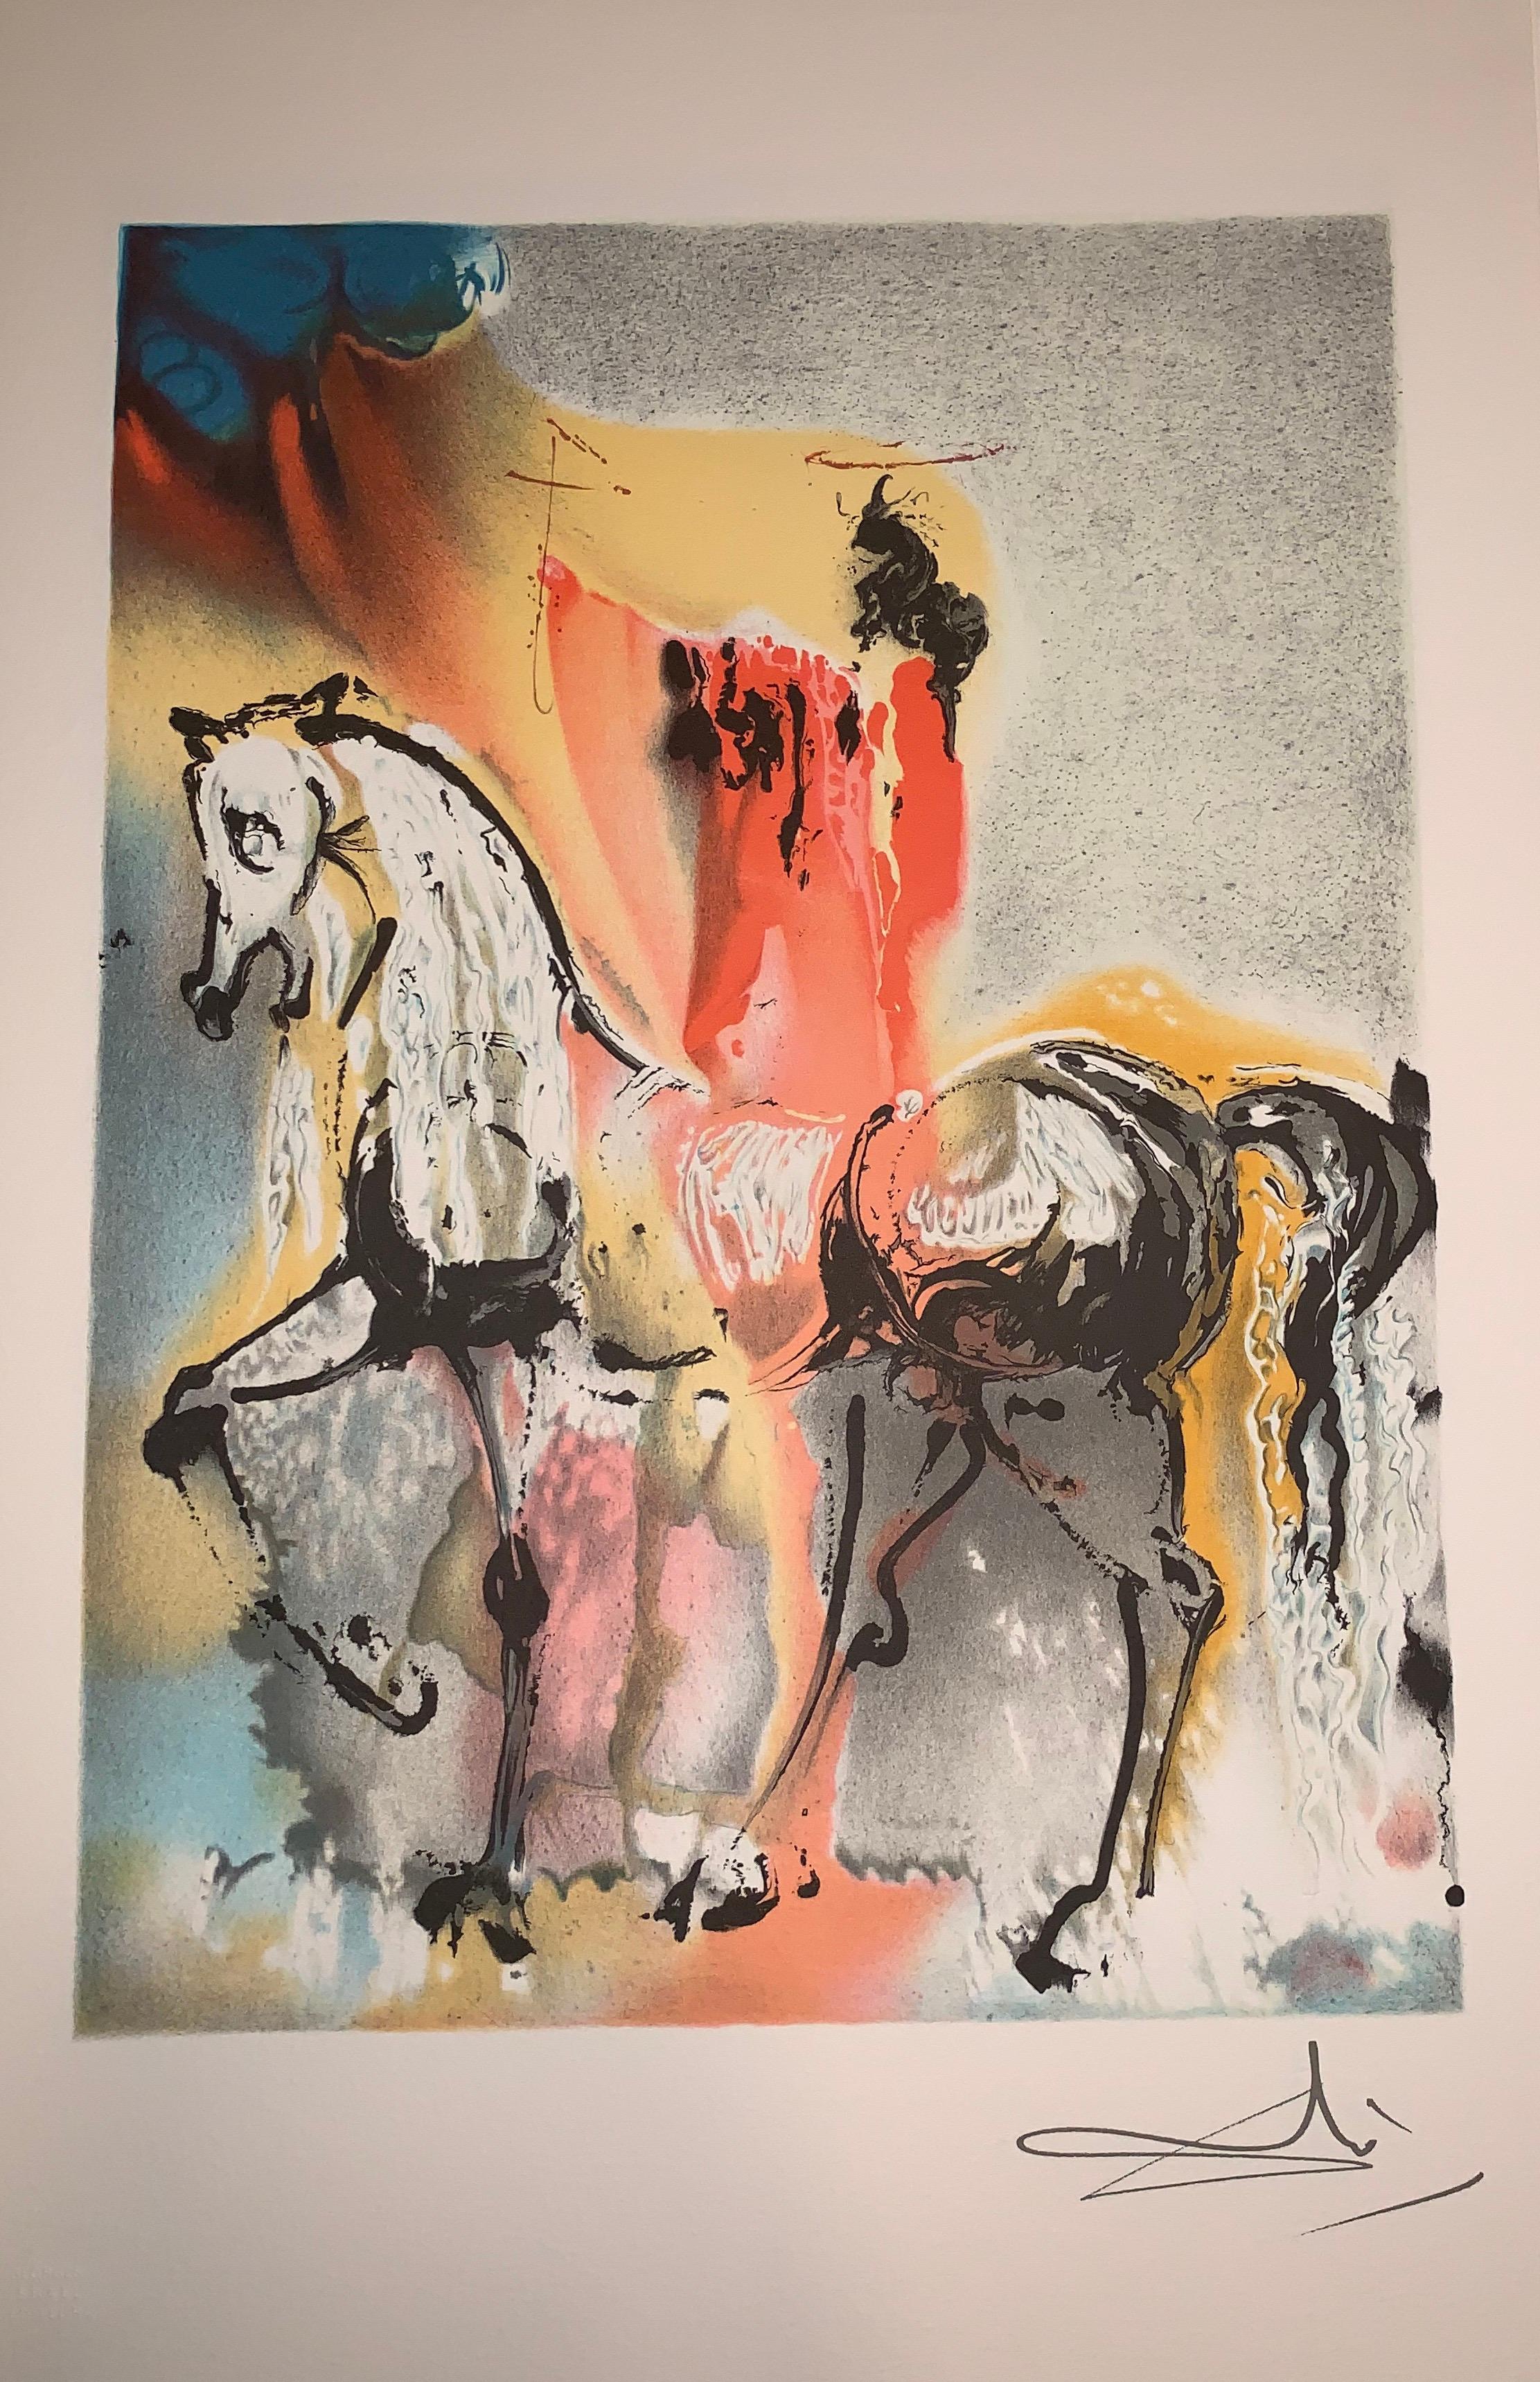 The Christian Knight - The horses of Dali - Lithograph - Surrealist - 1983 - Print by (after) Salvador Dali